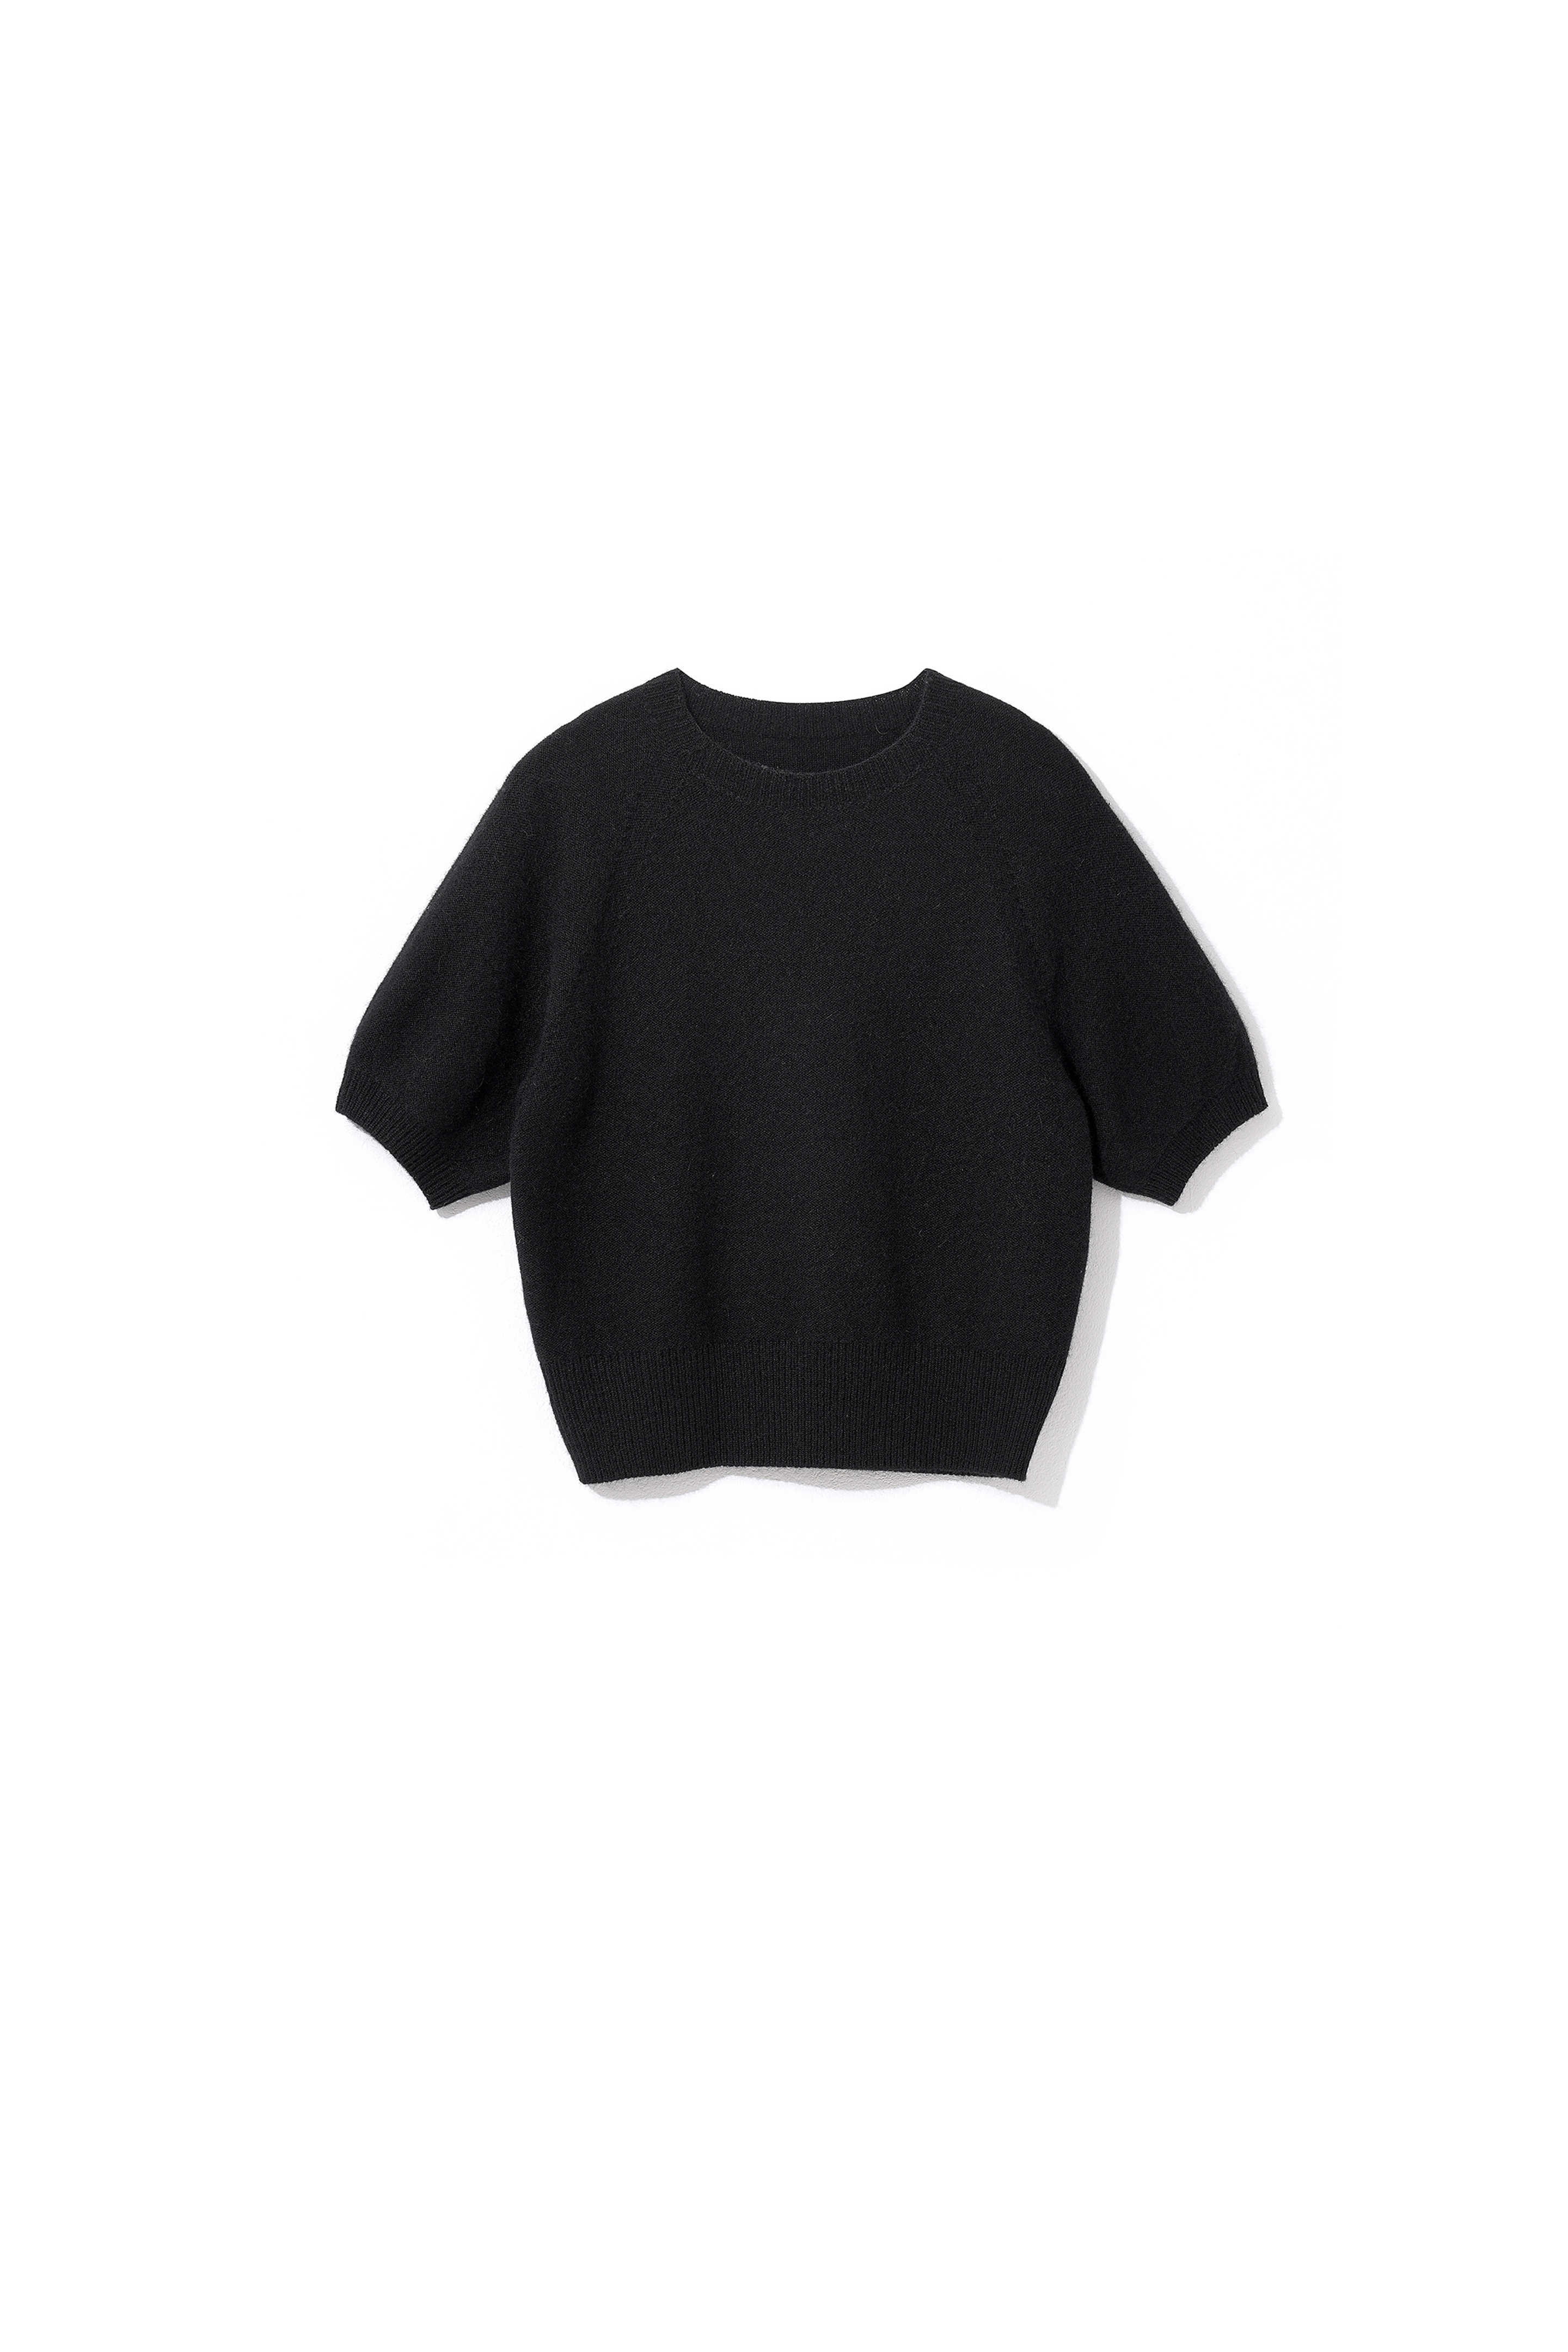 Mong Puff Sleeve Knitted P/O Black